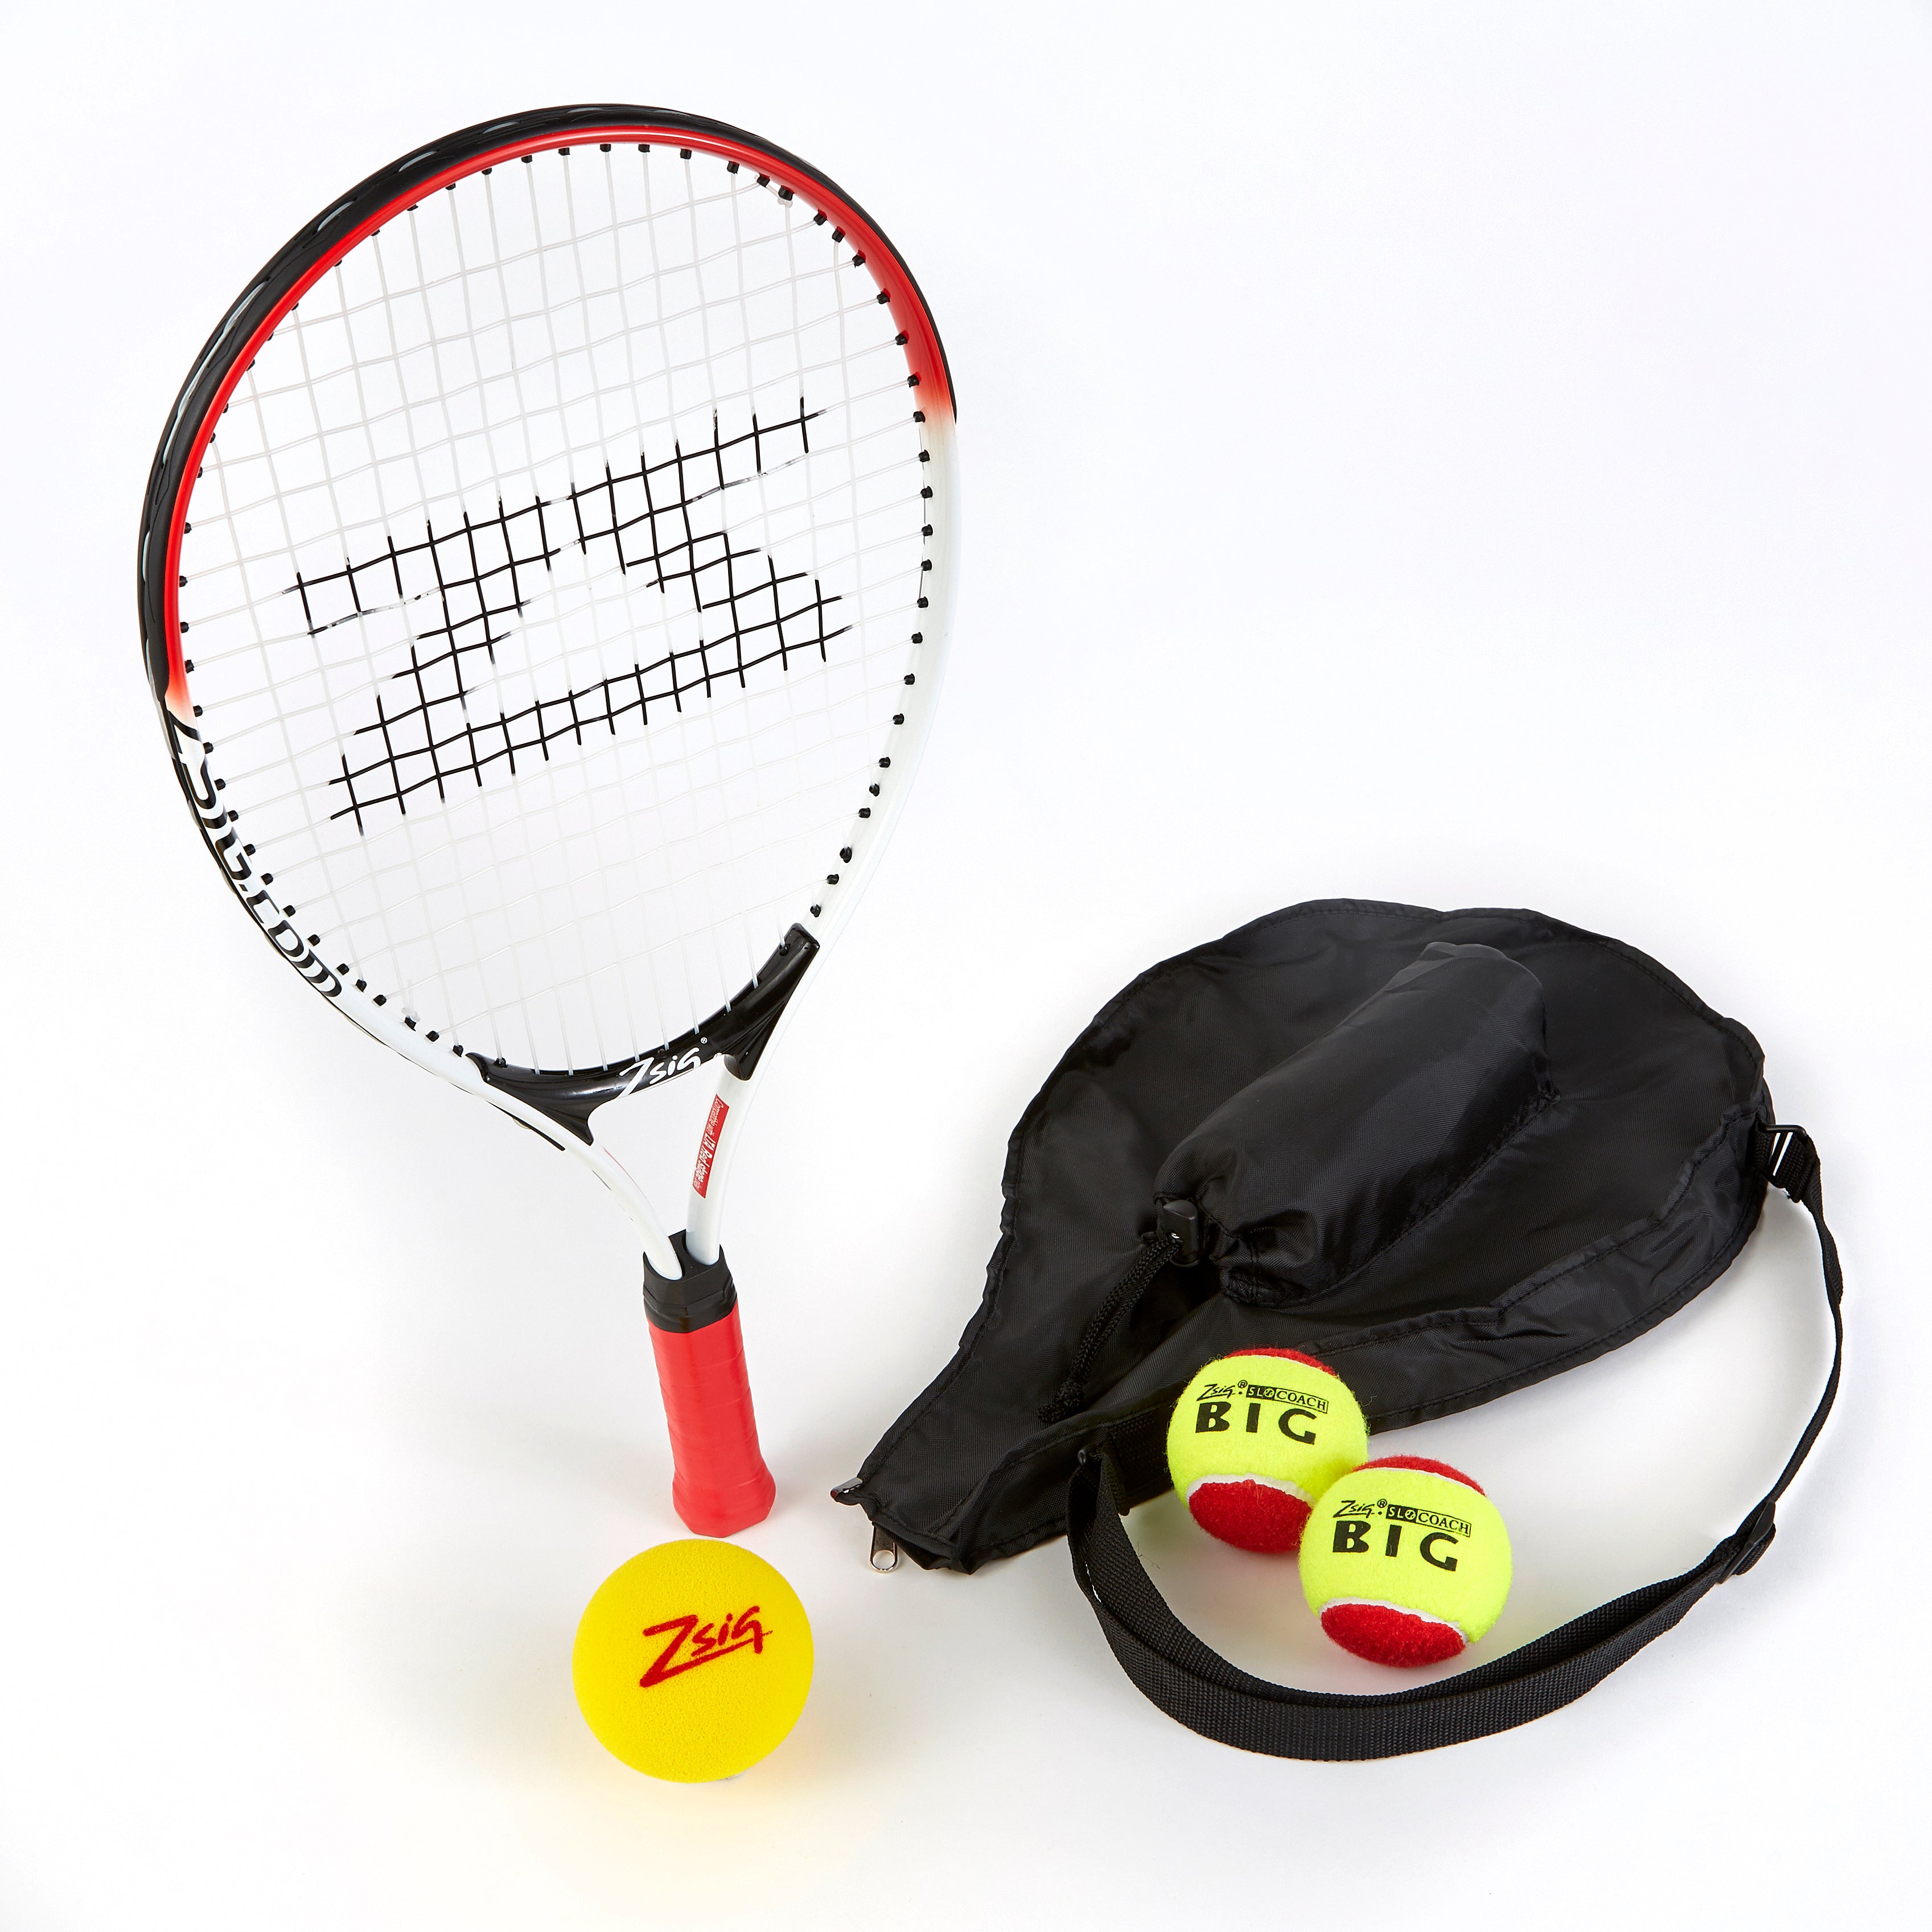 ZSIG 21 inch Mini tennis Racket with headcover, 2 SLOcoach Red Mini Tennis Balls and one sponge ball